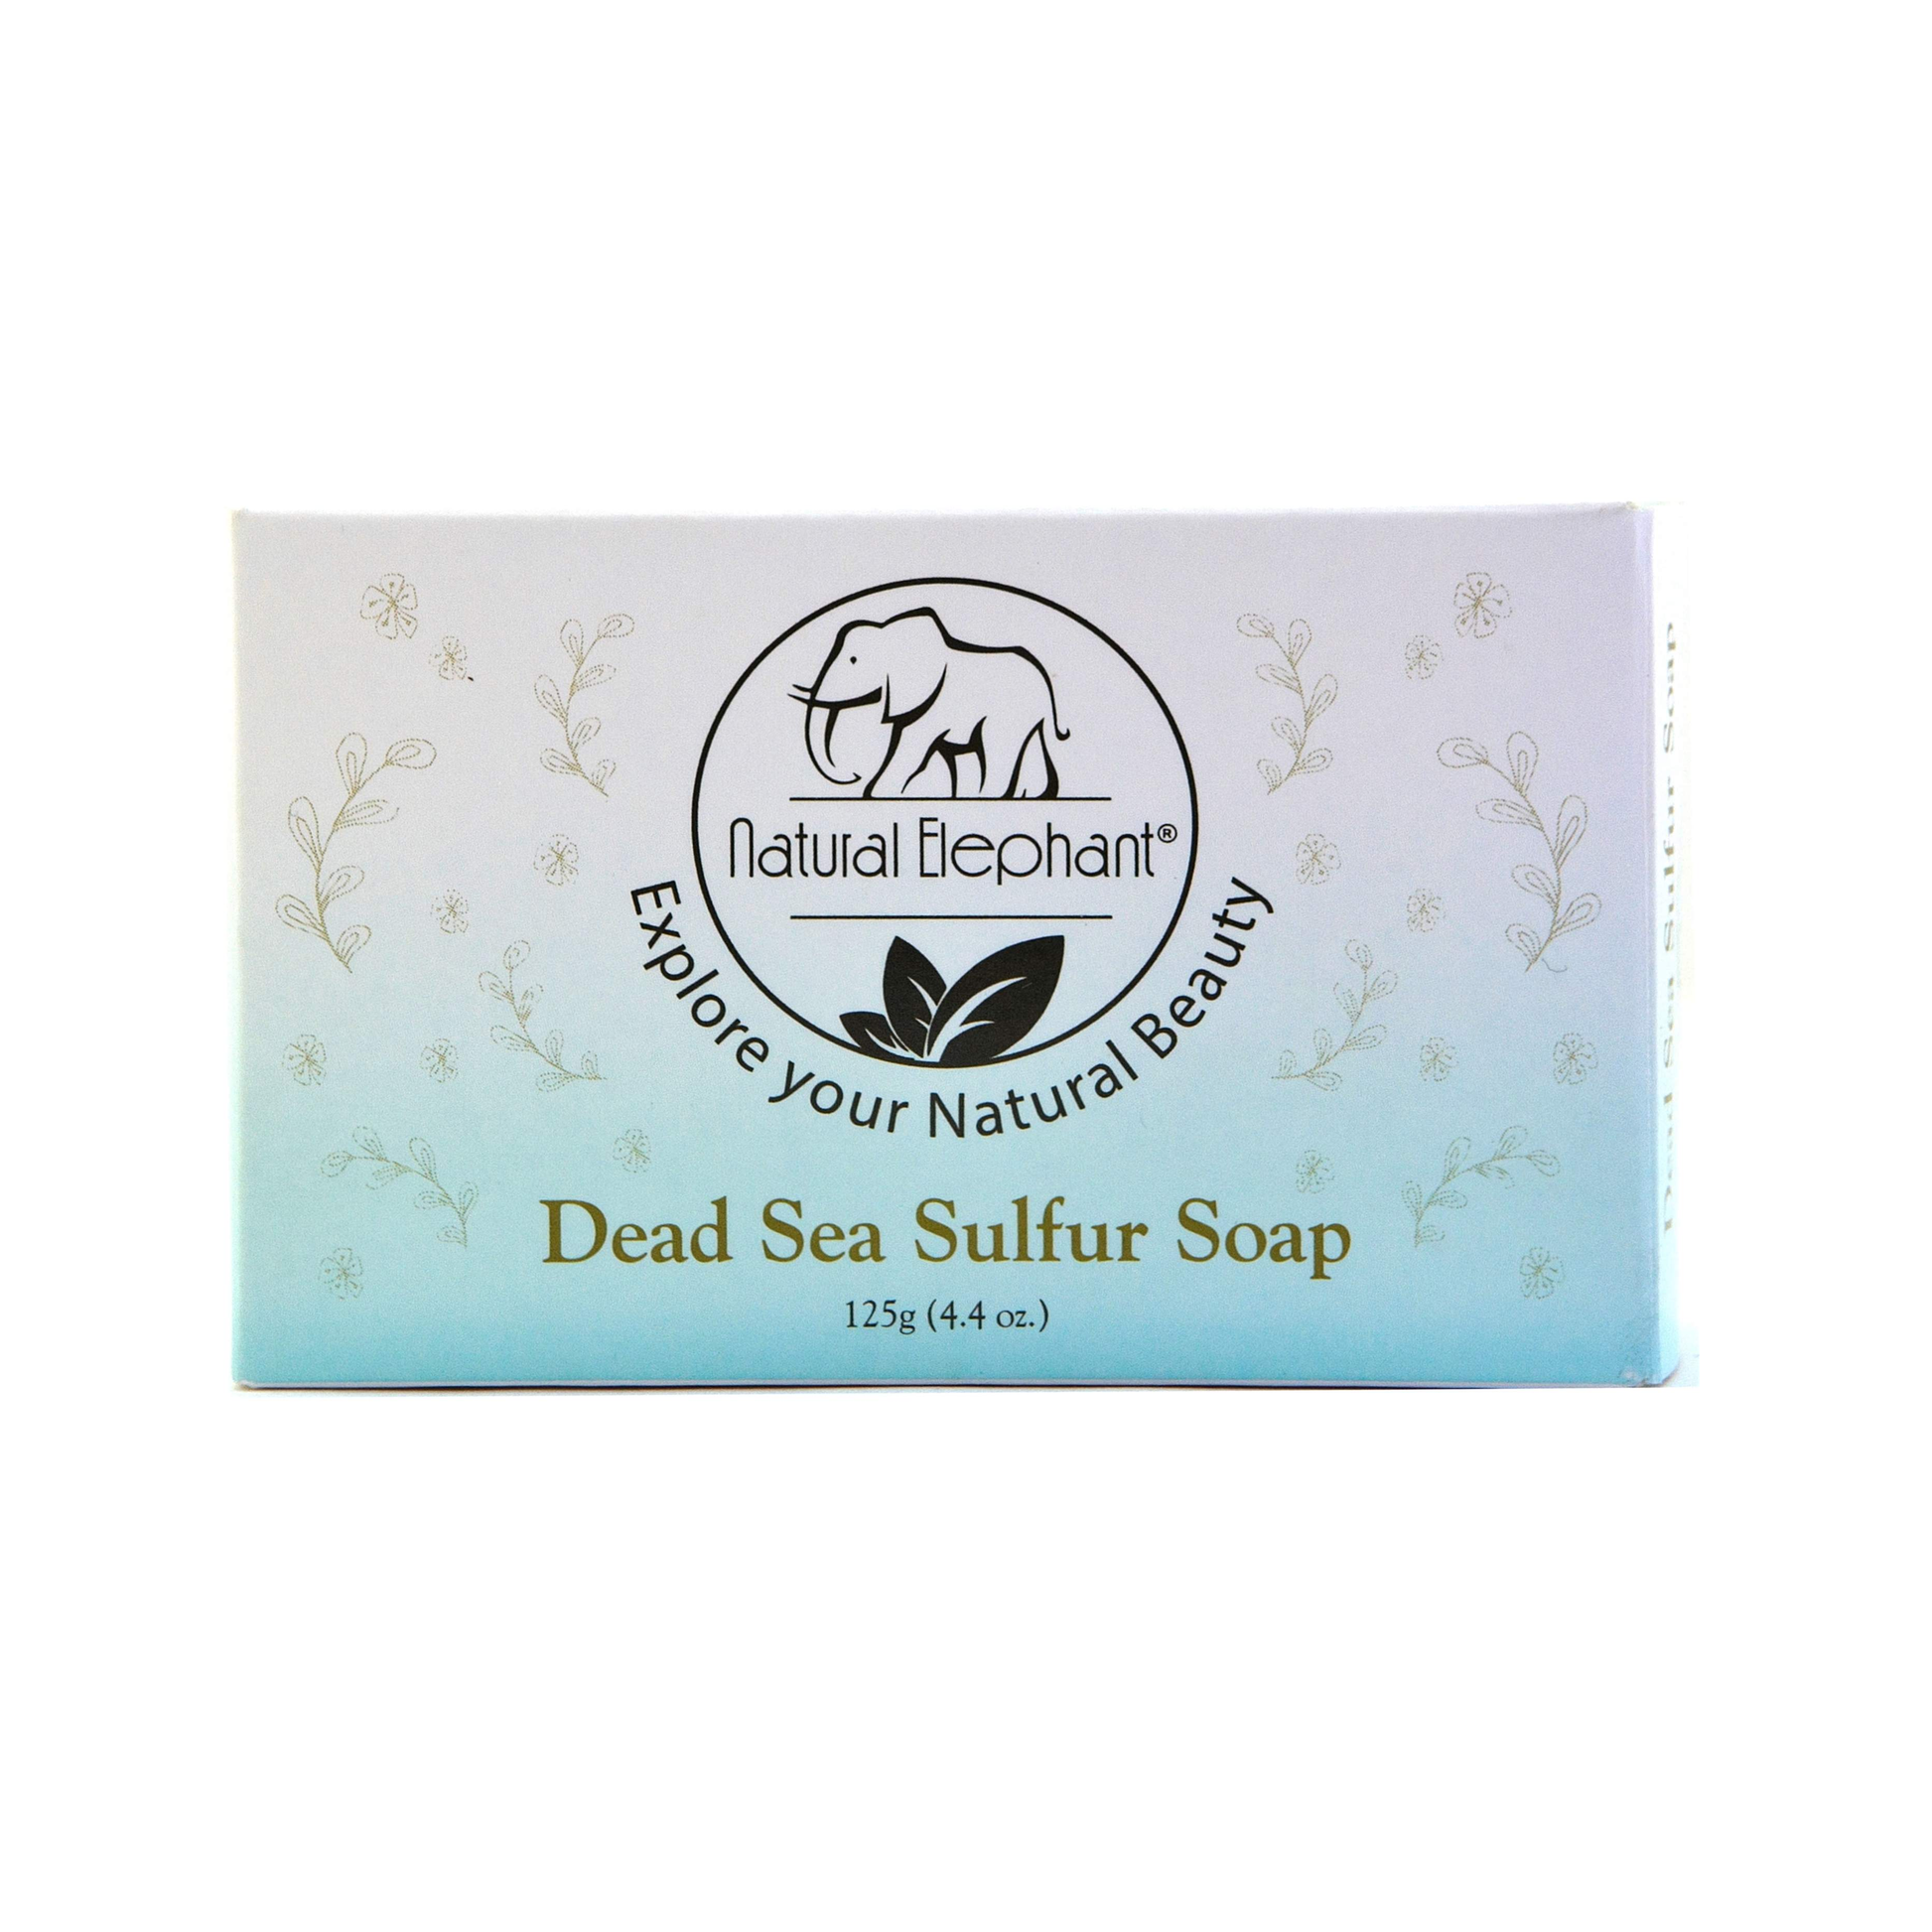 Natural Elephant Dead Sea Sulfur Soap 4.4 oz (125 g)-Natural Elephant-BB_Bath and Shower,BB_Soap Bars,Brand_Natural Elephant,Collection_Bath and Body,Collection_Skincare,Concern_Acne & Blemishes,Concern_Combination Skin,Concern_Dark Spots,Concern_Large Pores,Concern_Oily Skin,Concern_Redness,Concern_Sensitive Skin,NATURAL_Dead Sea Collection,Skincare_Cleansers